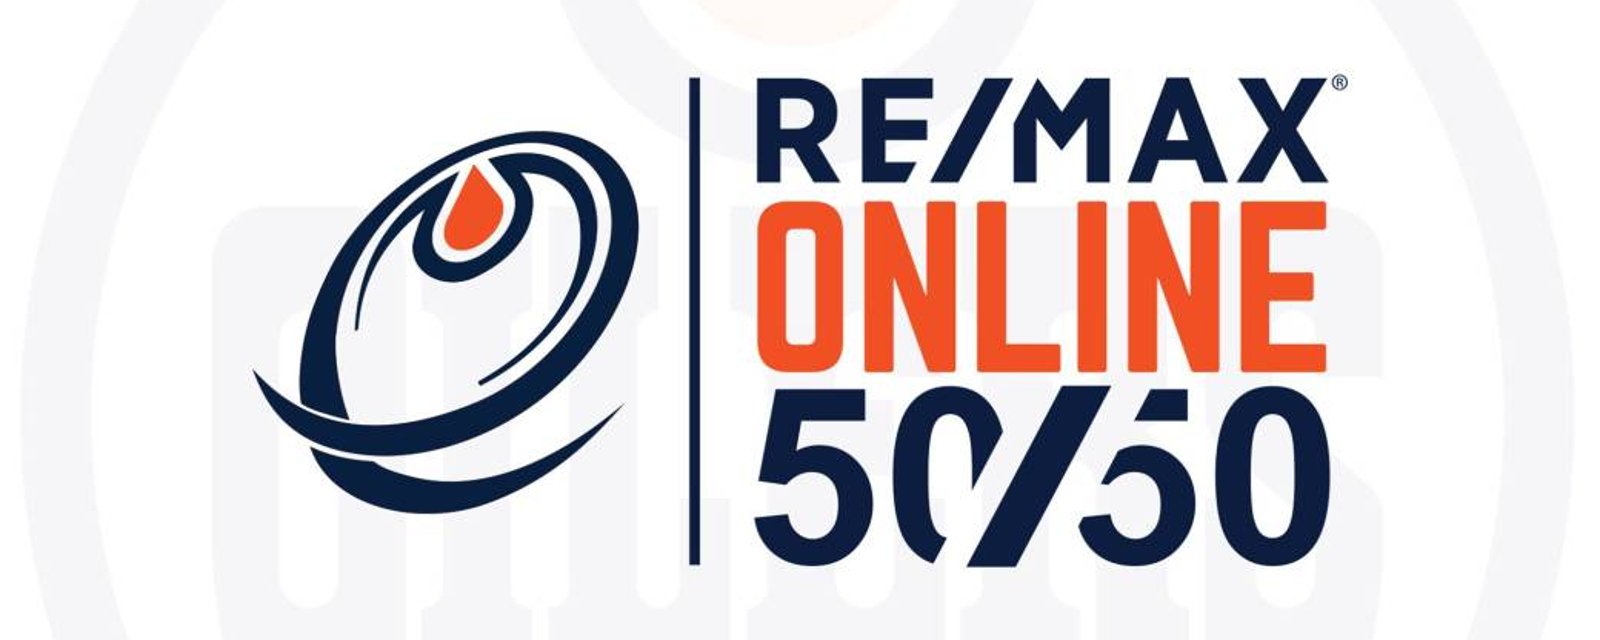 Oilers forced to shut down 50/50 raffle! 